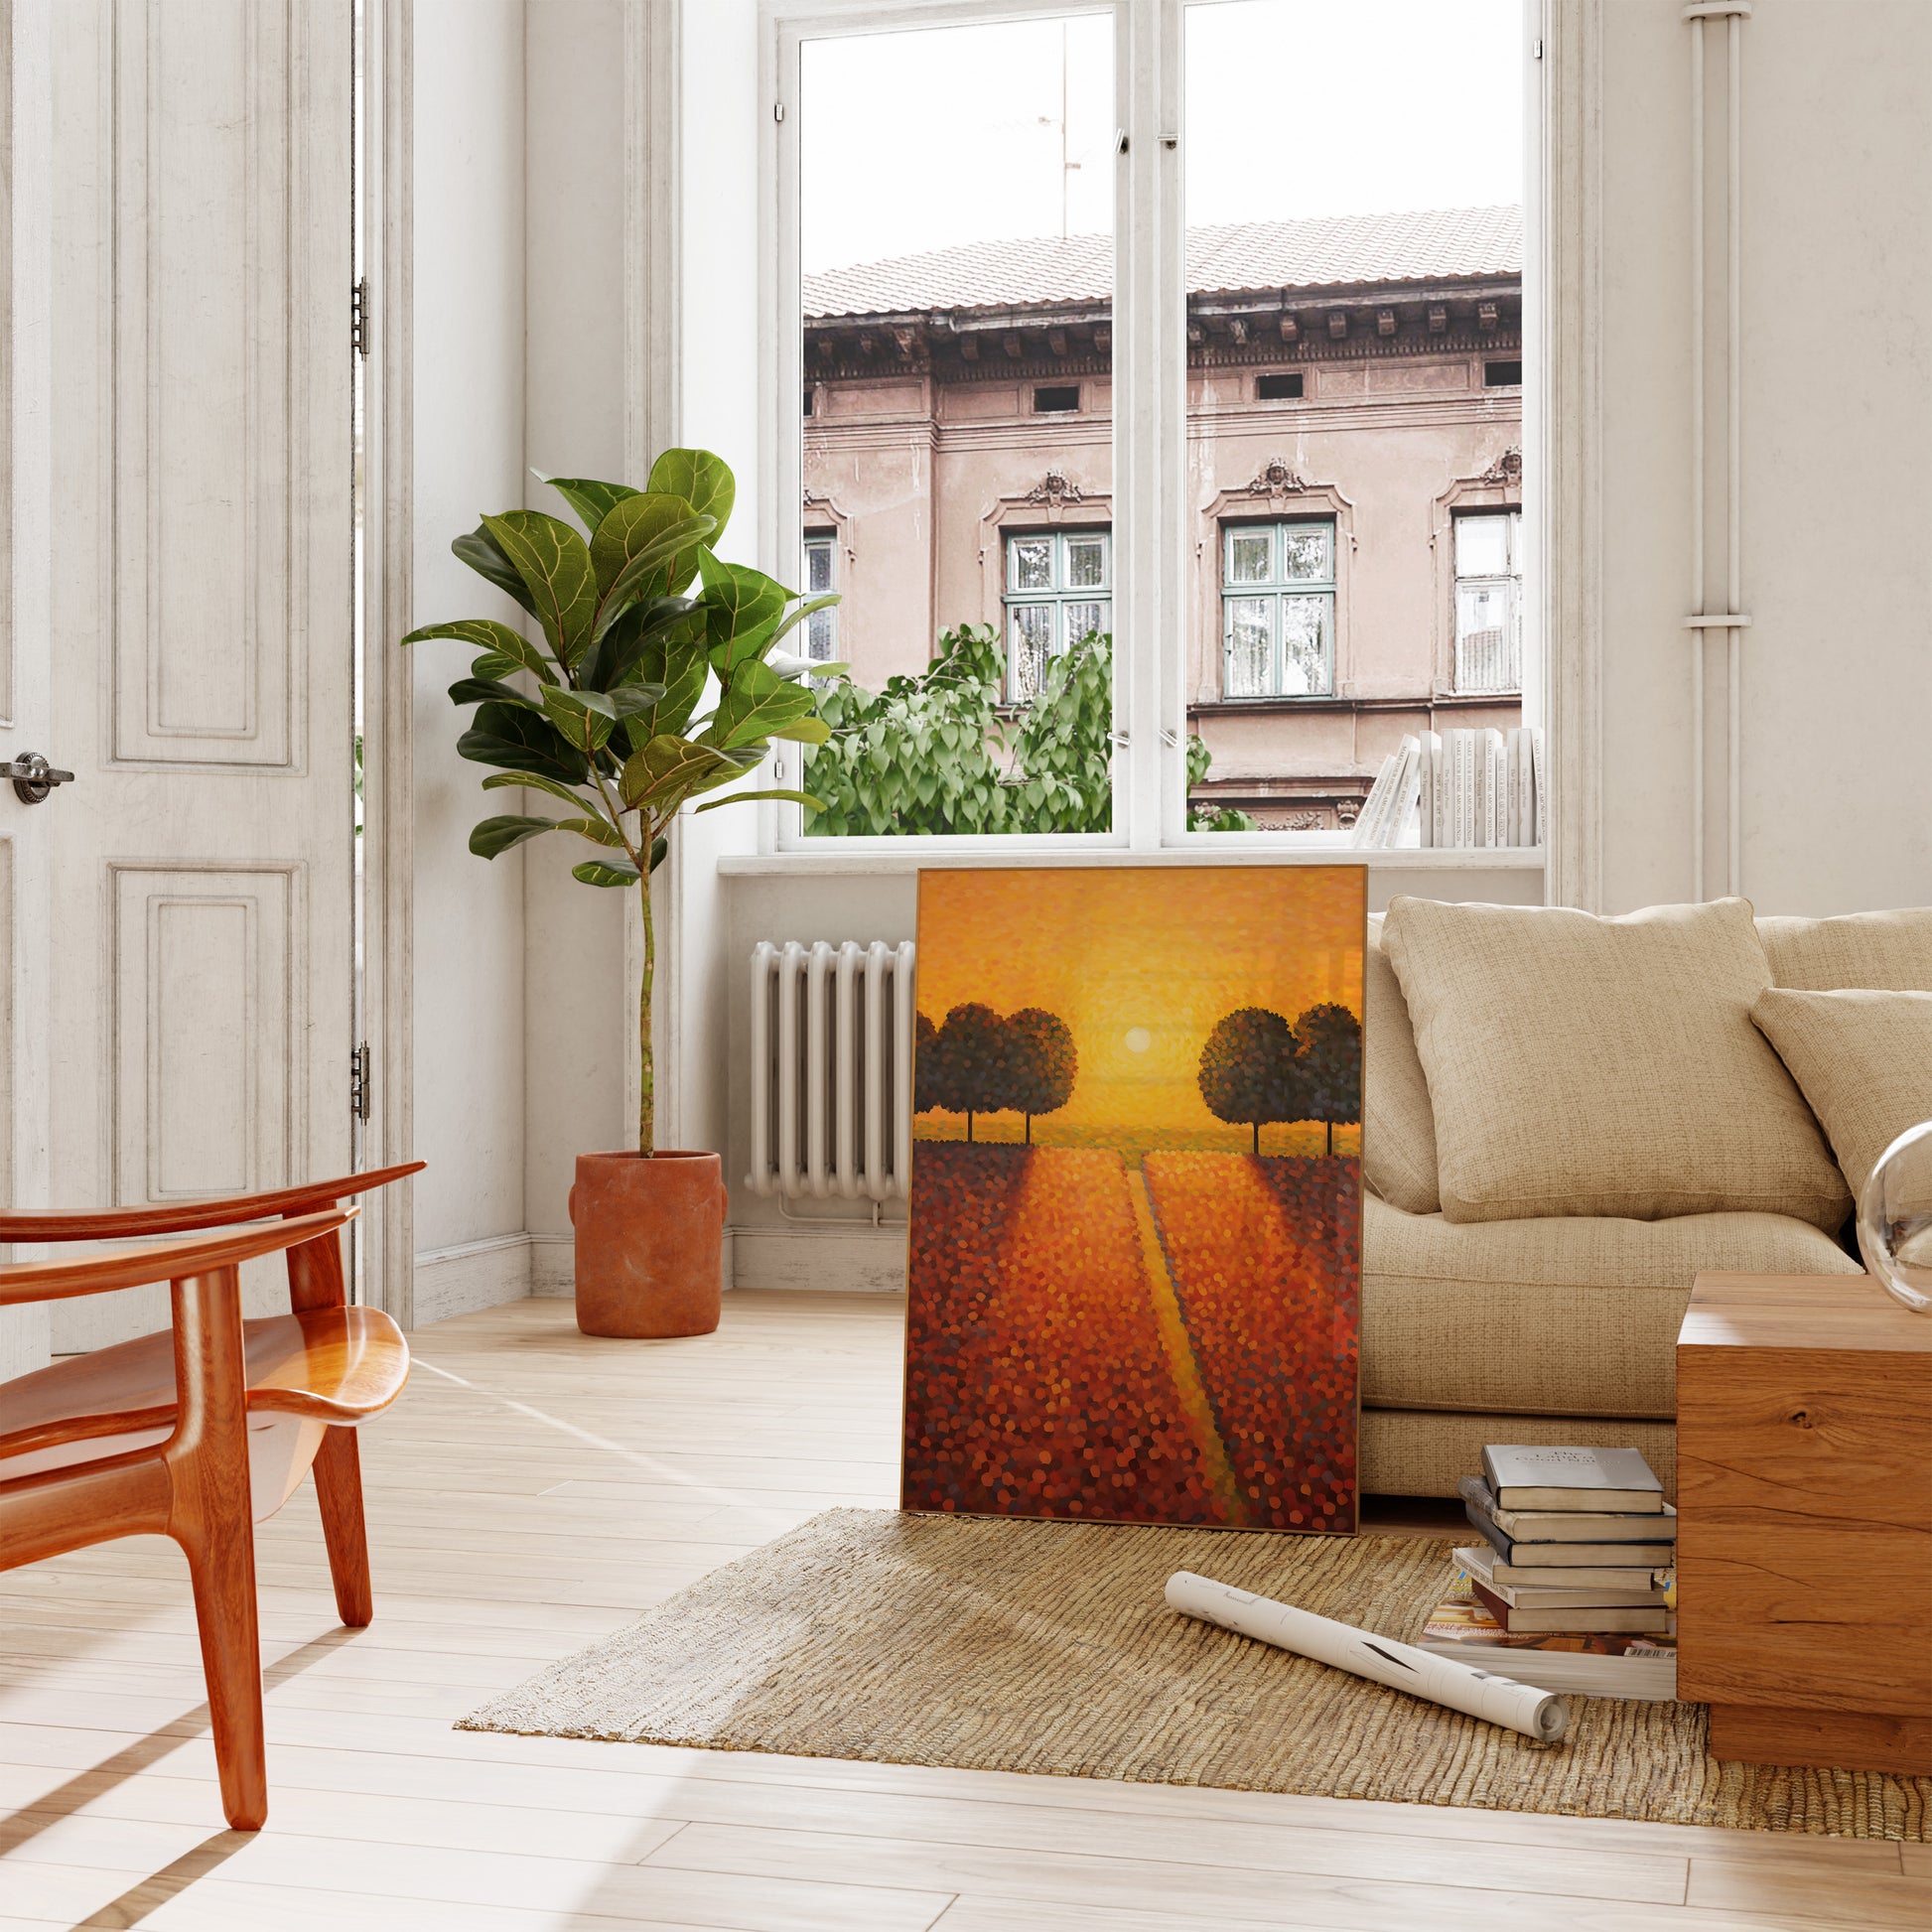 Bright art canvas in a cozy living room with plants and natural light.